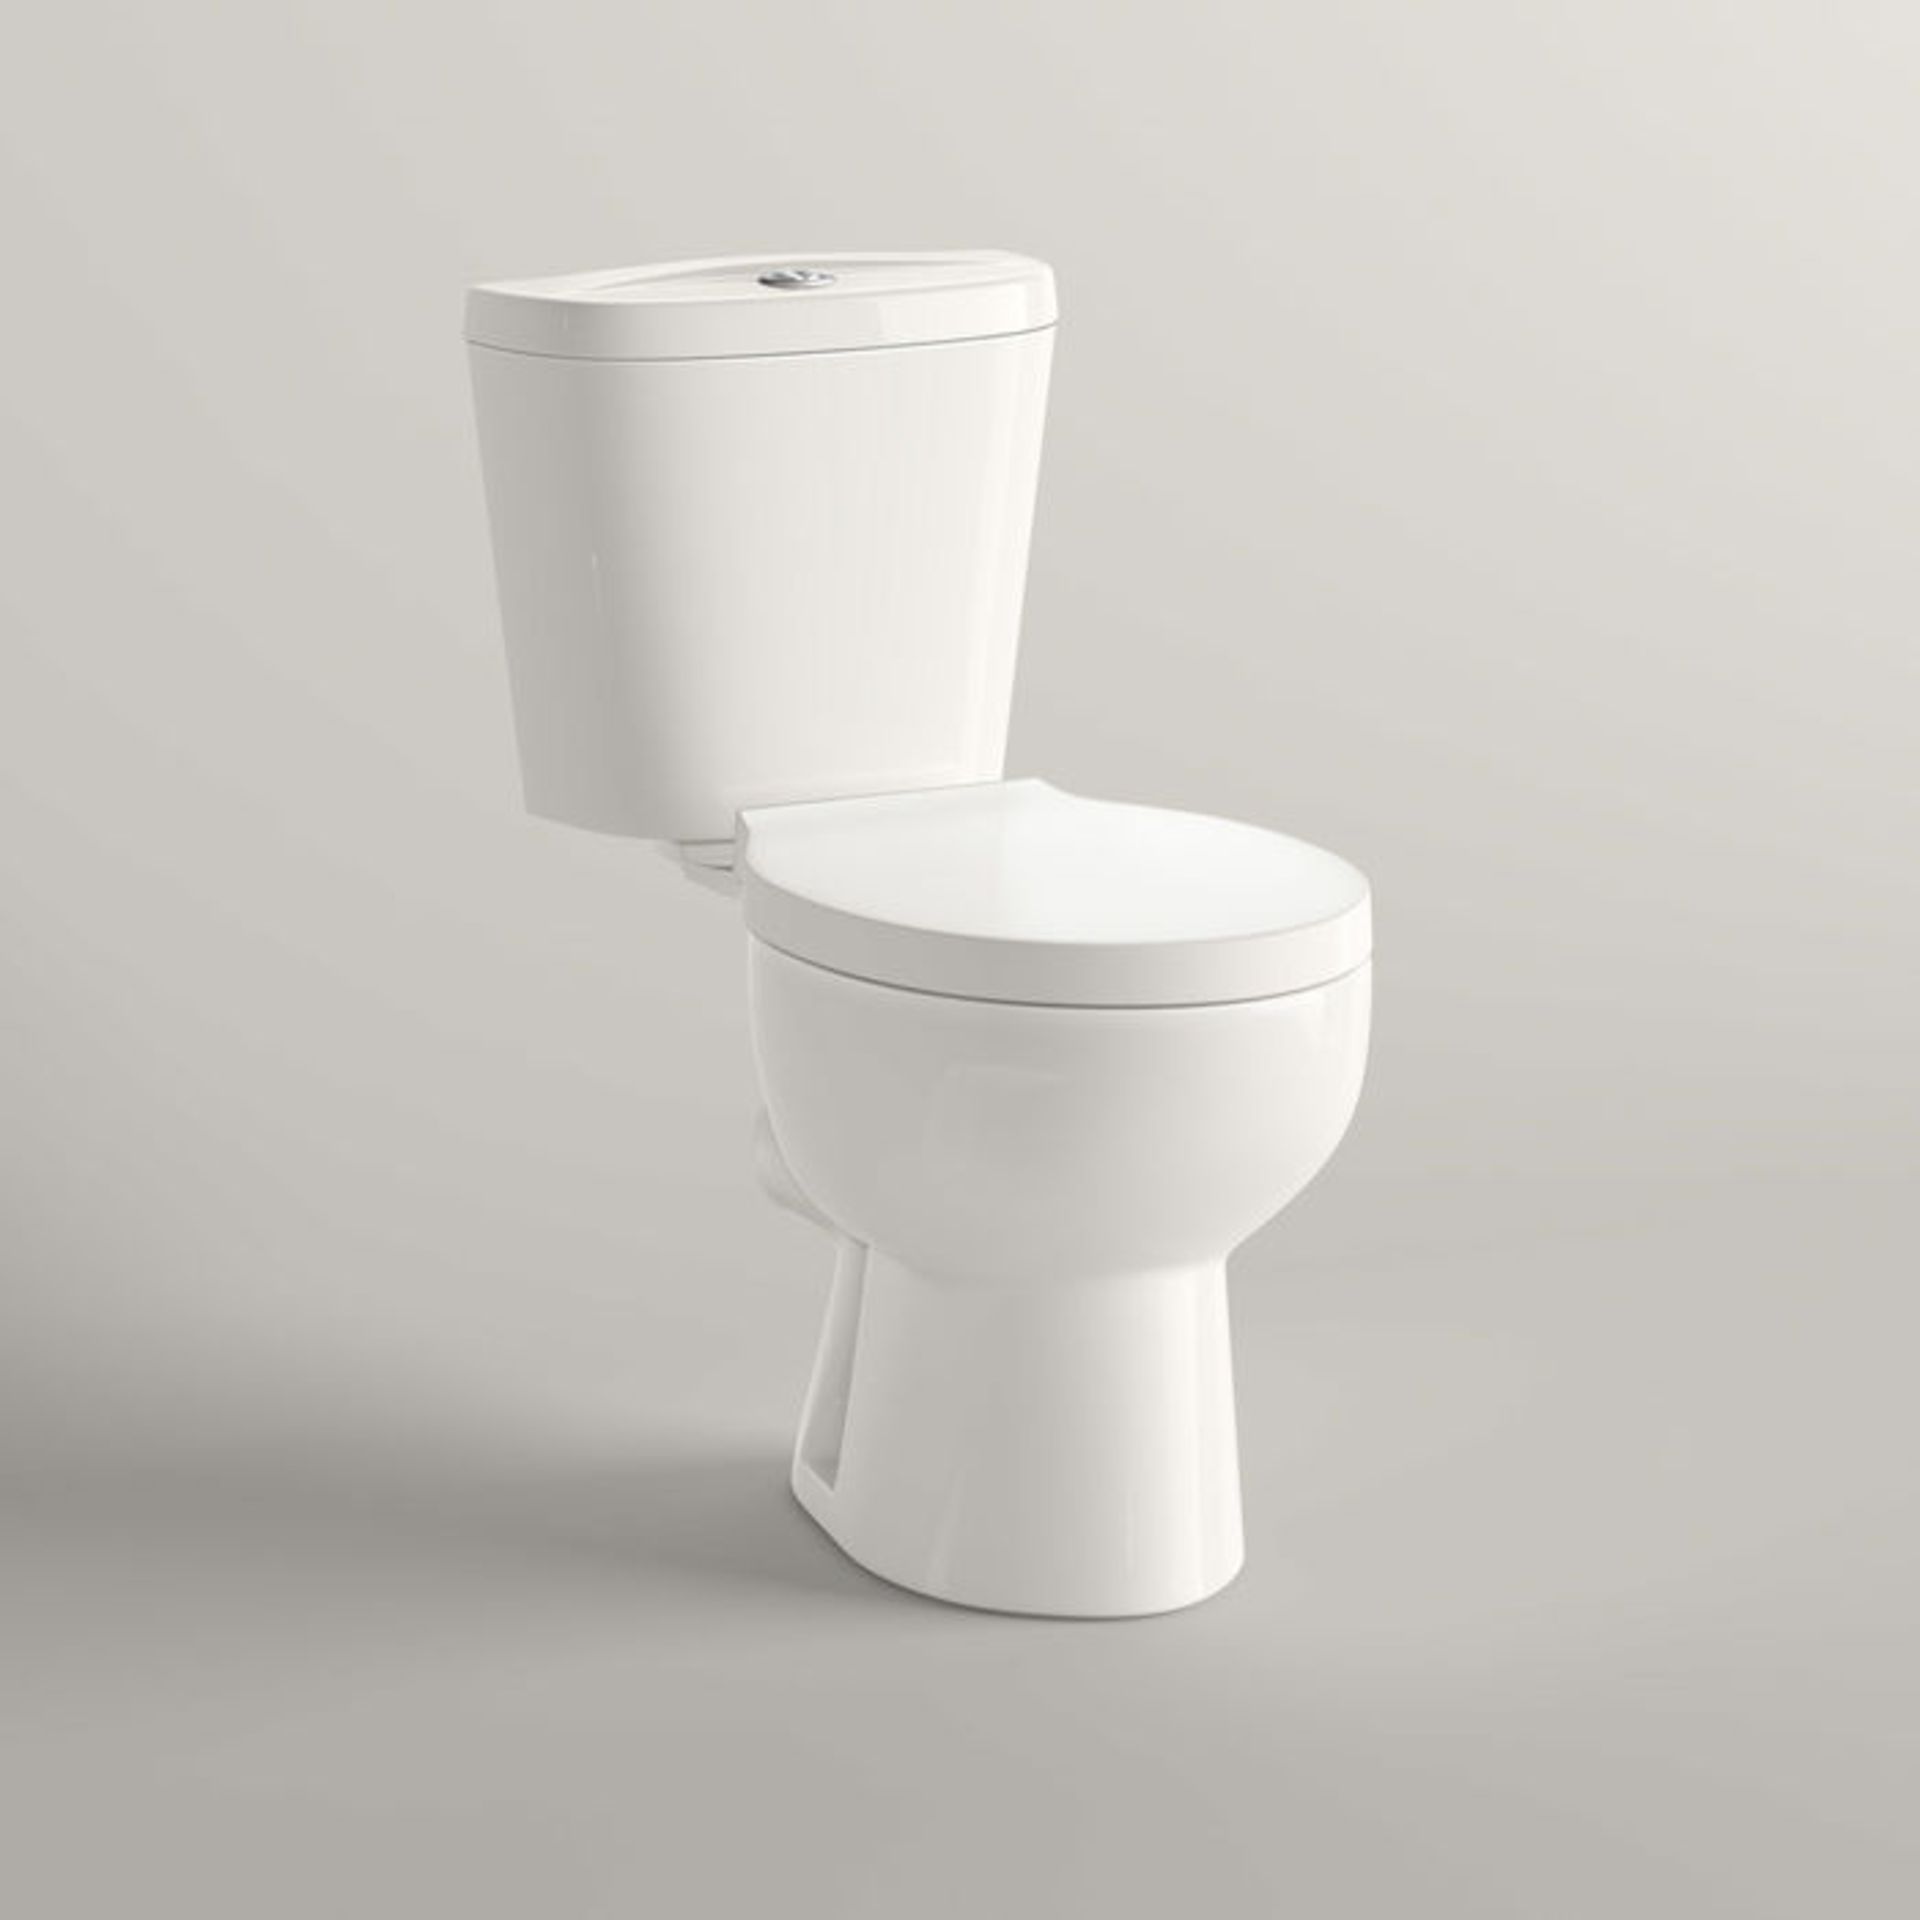 (AA141) Quartz Close Coupled Toilet.. We love this because it is simply great value! Made from ... - Image 2 of 3